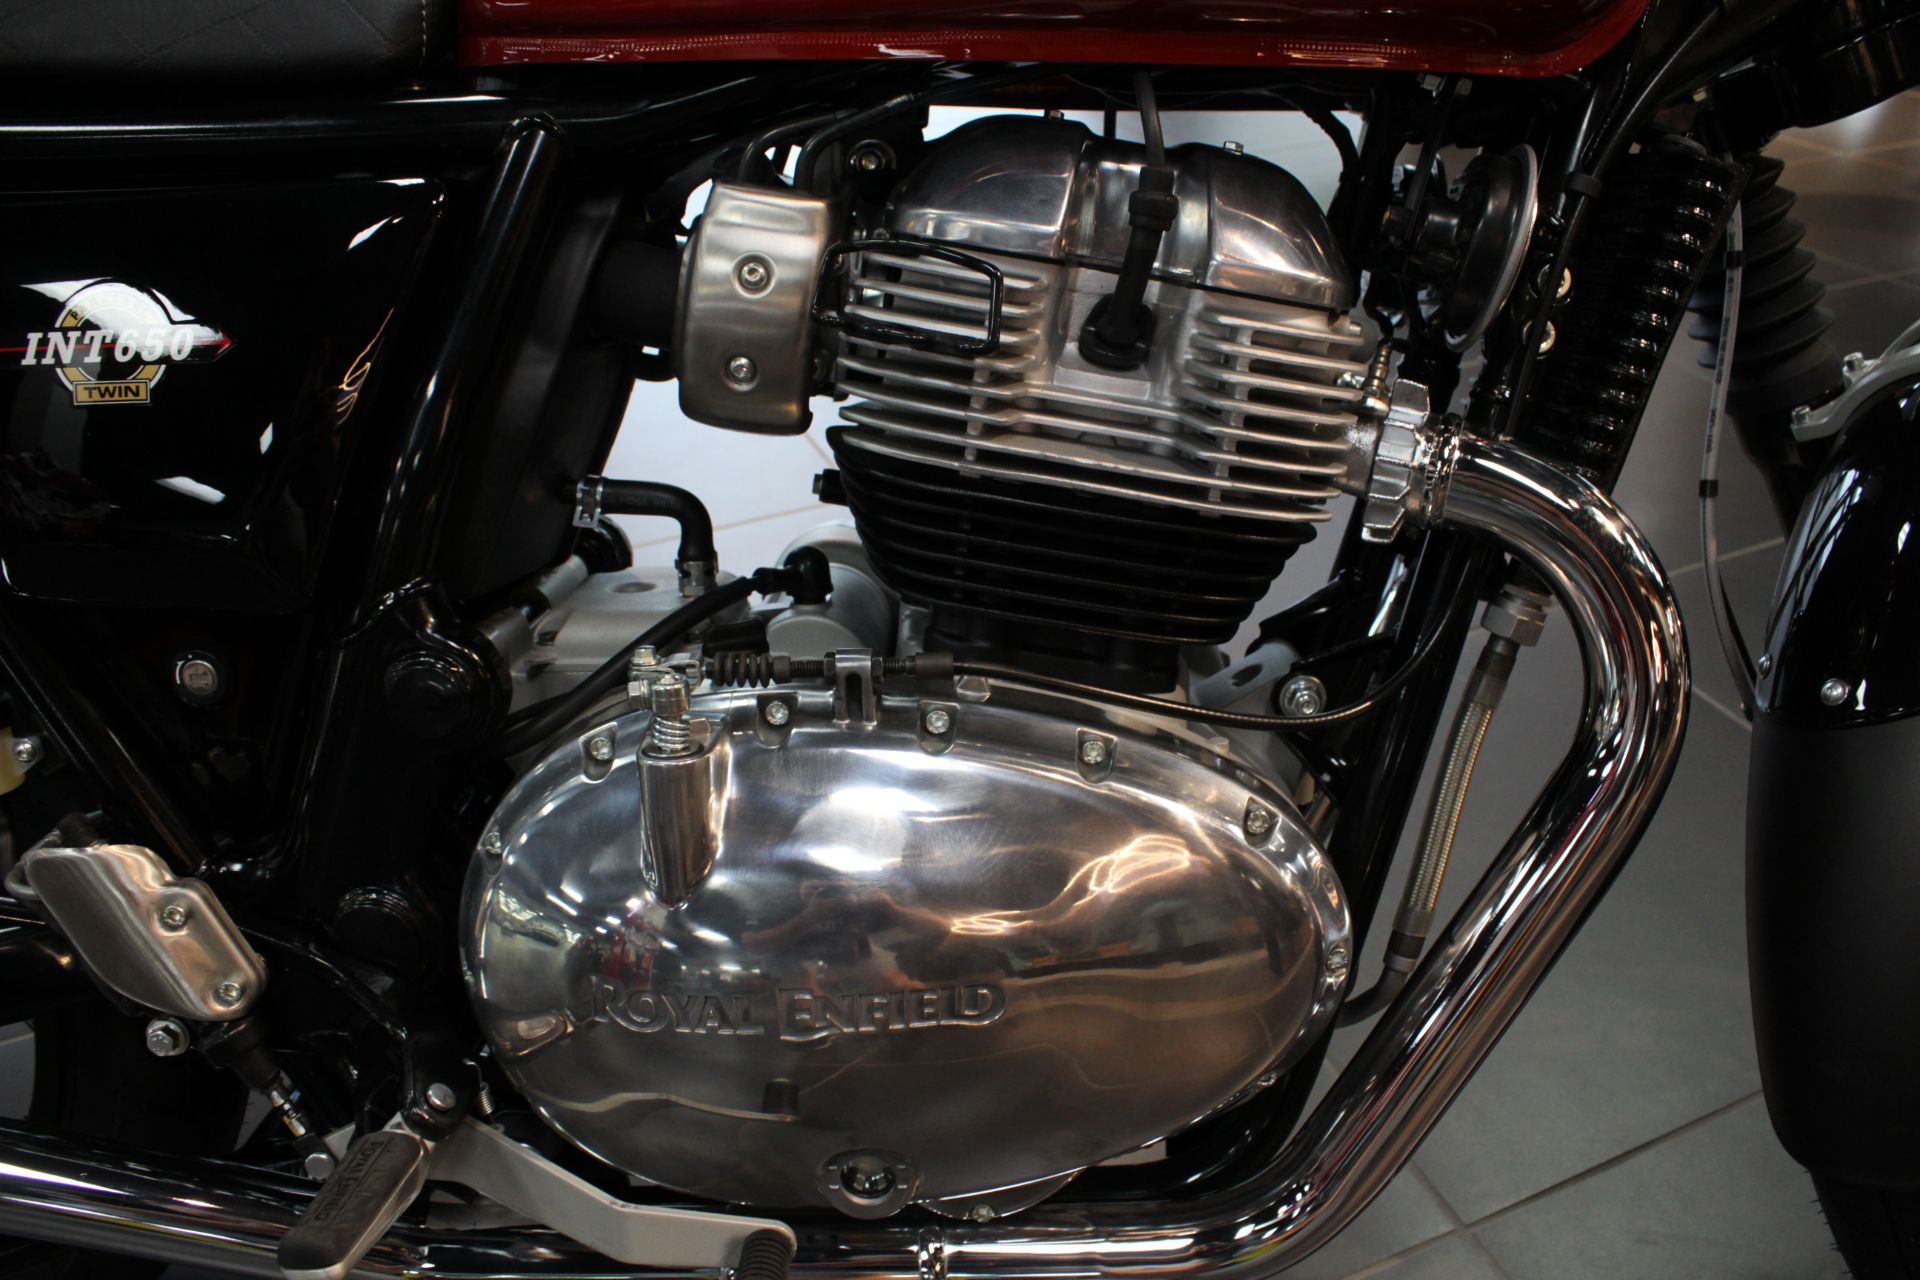 2023 Royal Enfield INT650 in West Allis, Wisconsin - Photo 4